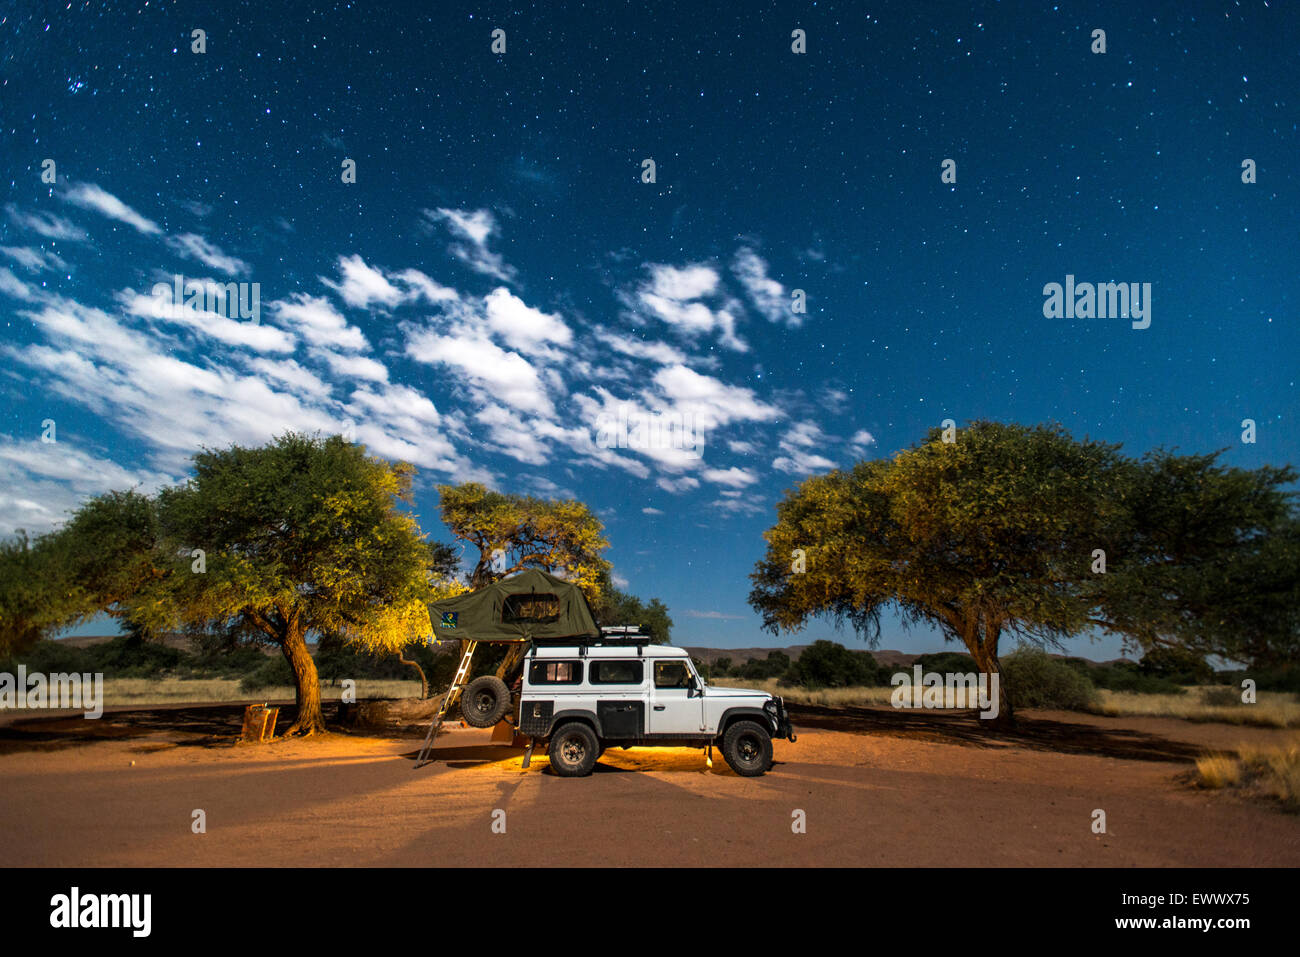 duwisib Namibia - Long exposure of a Land Rover parked in the desert Stock Photo